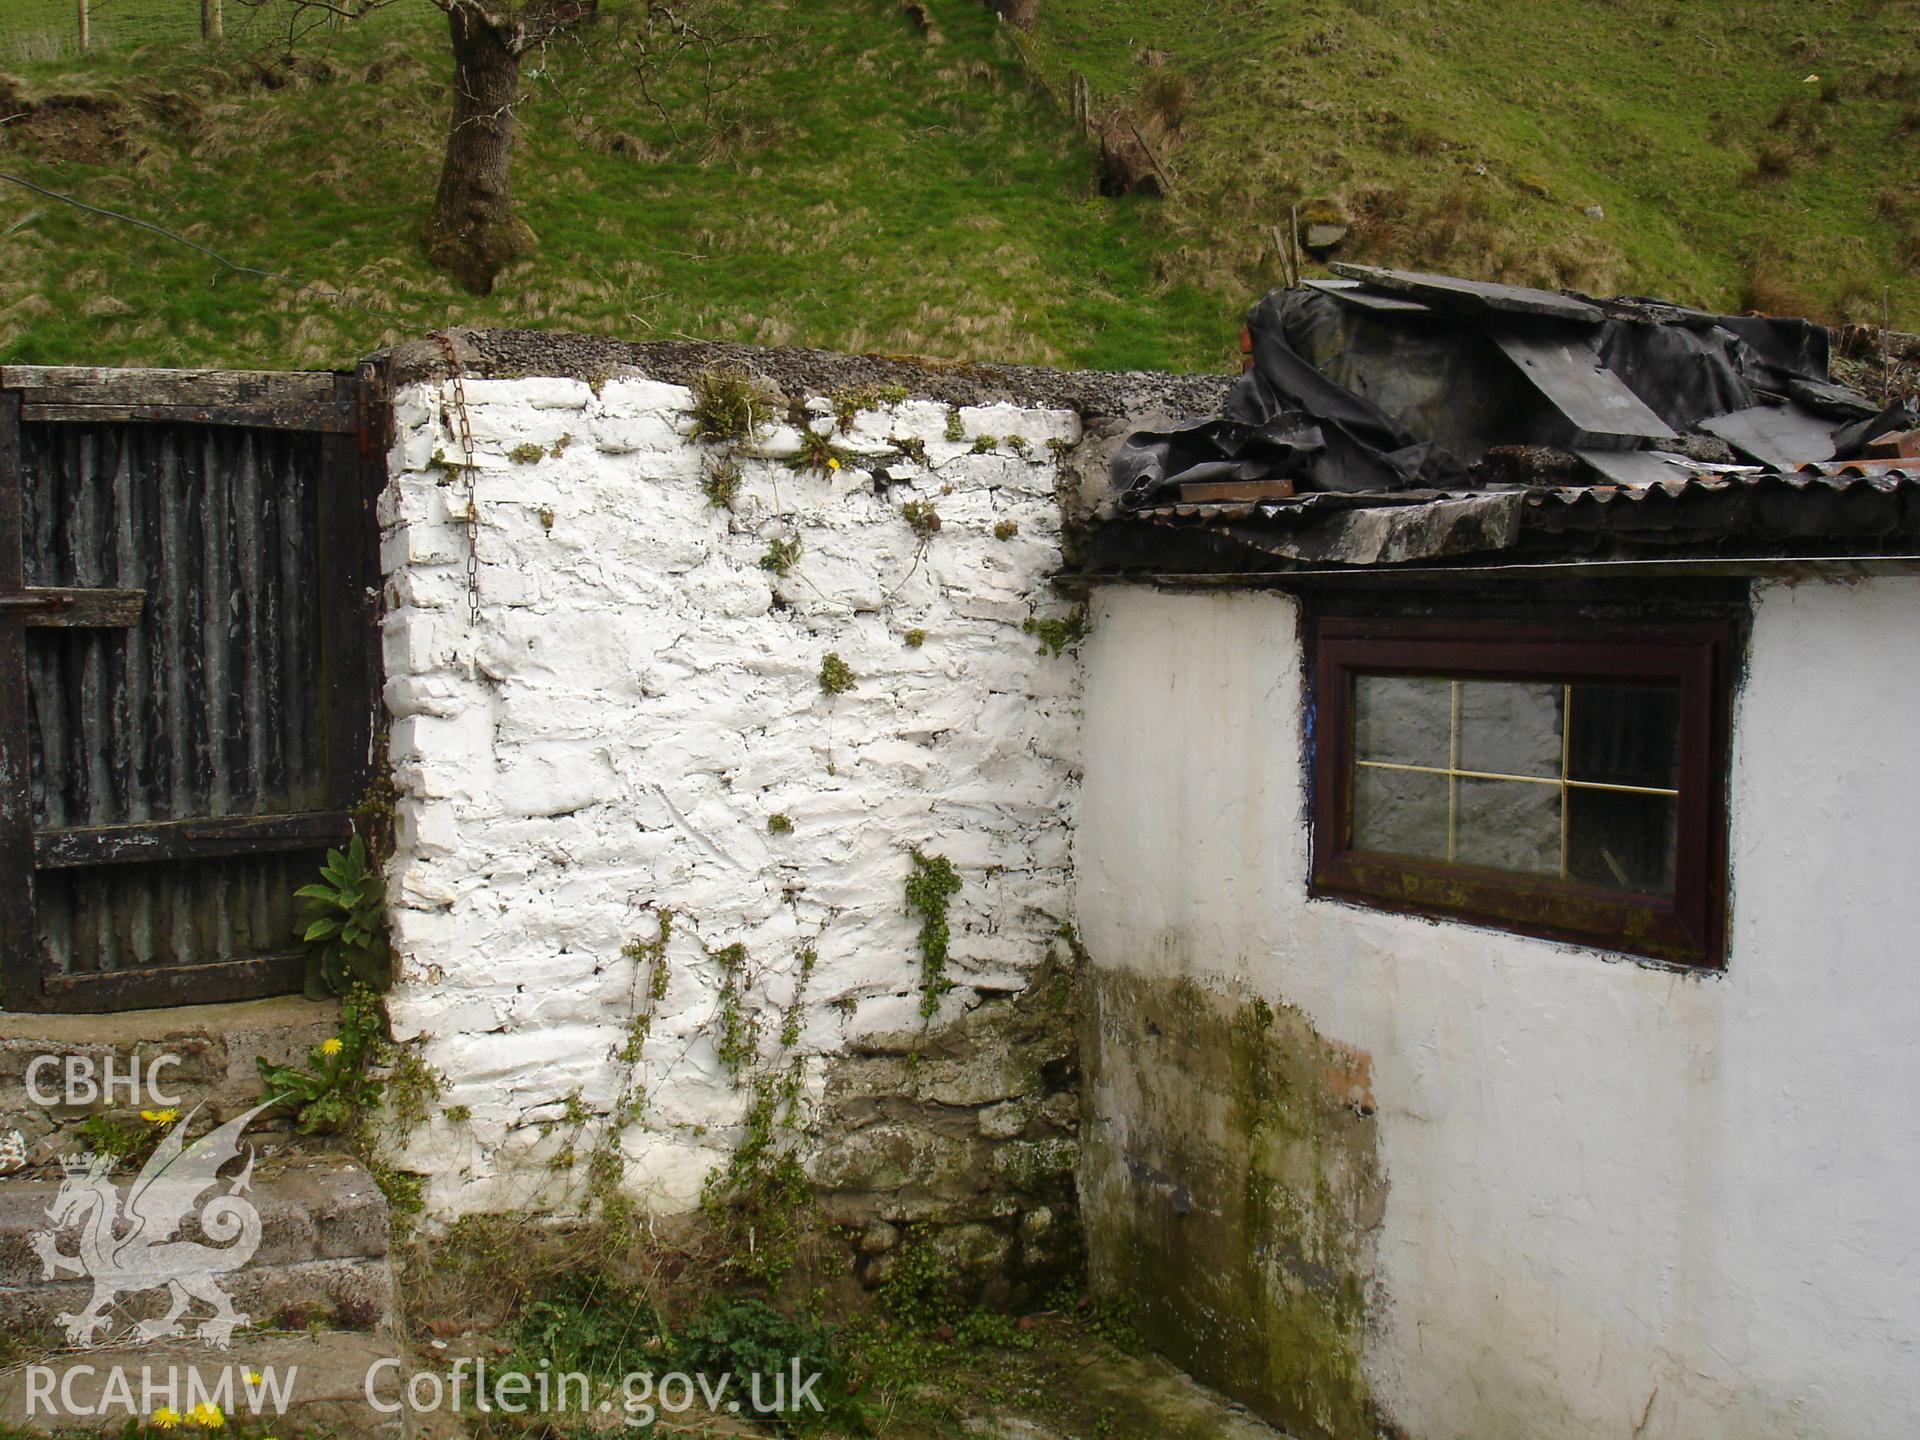 Colour digital photograph showing exterior view (outbuilding) of a cottage at Gelli Houses, Cymmer.